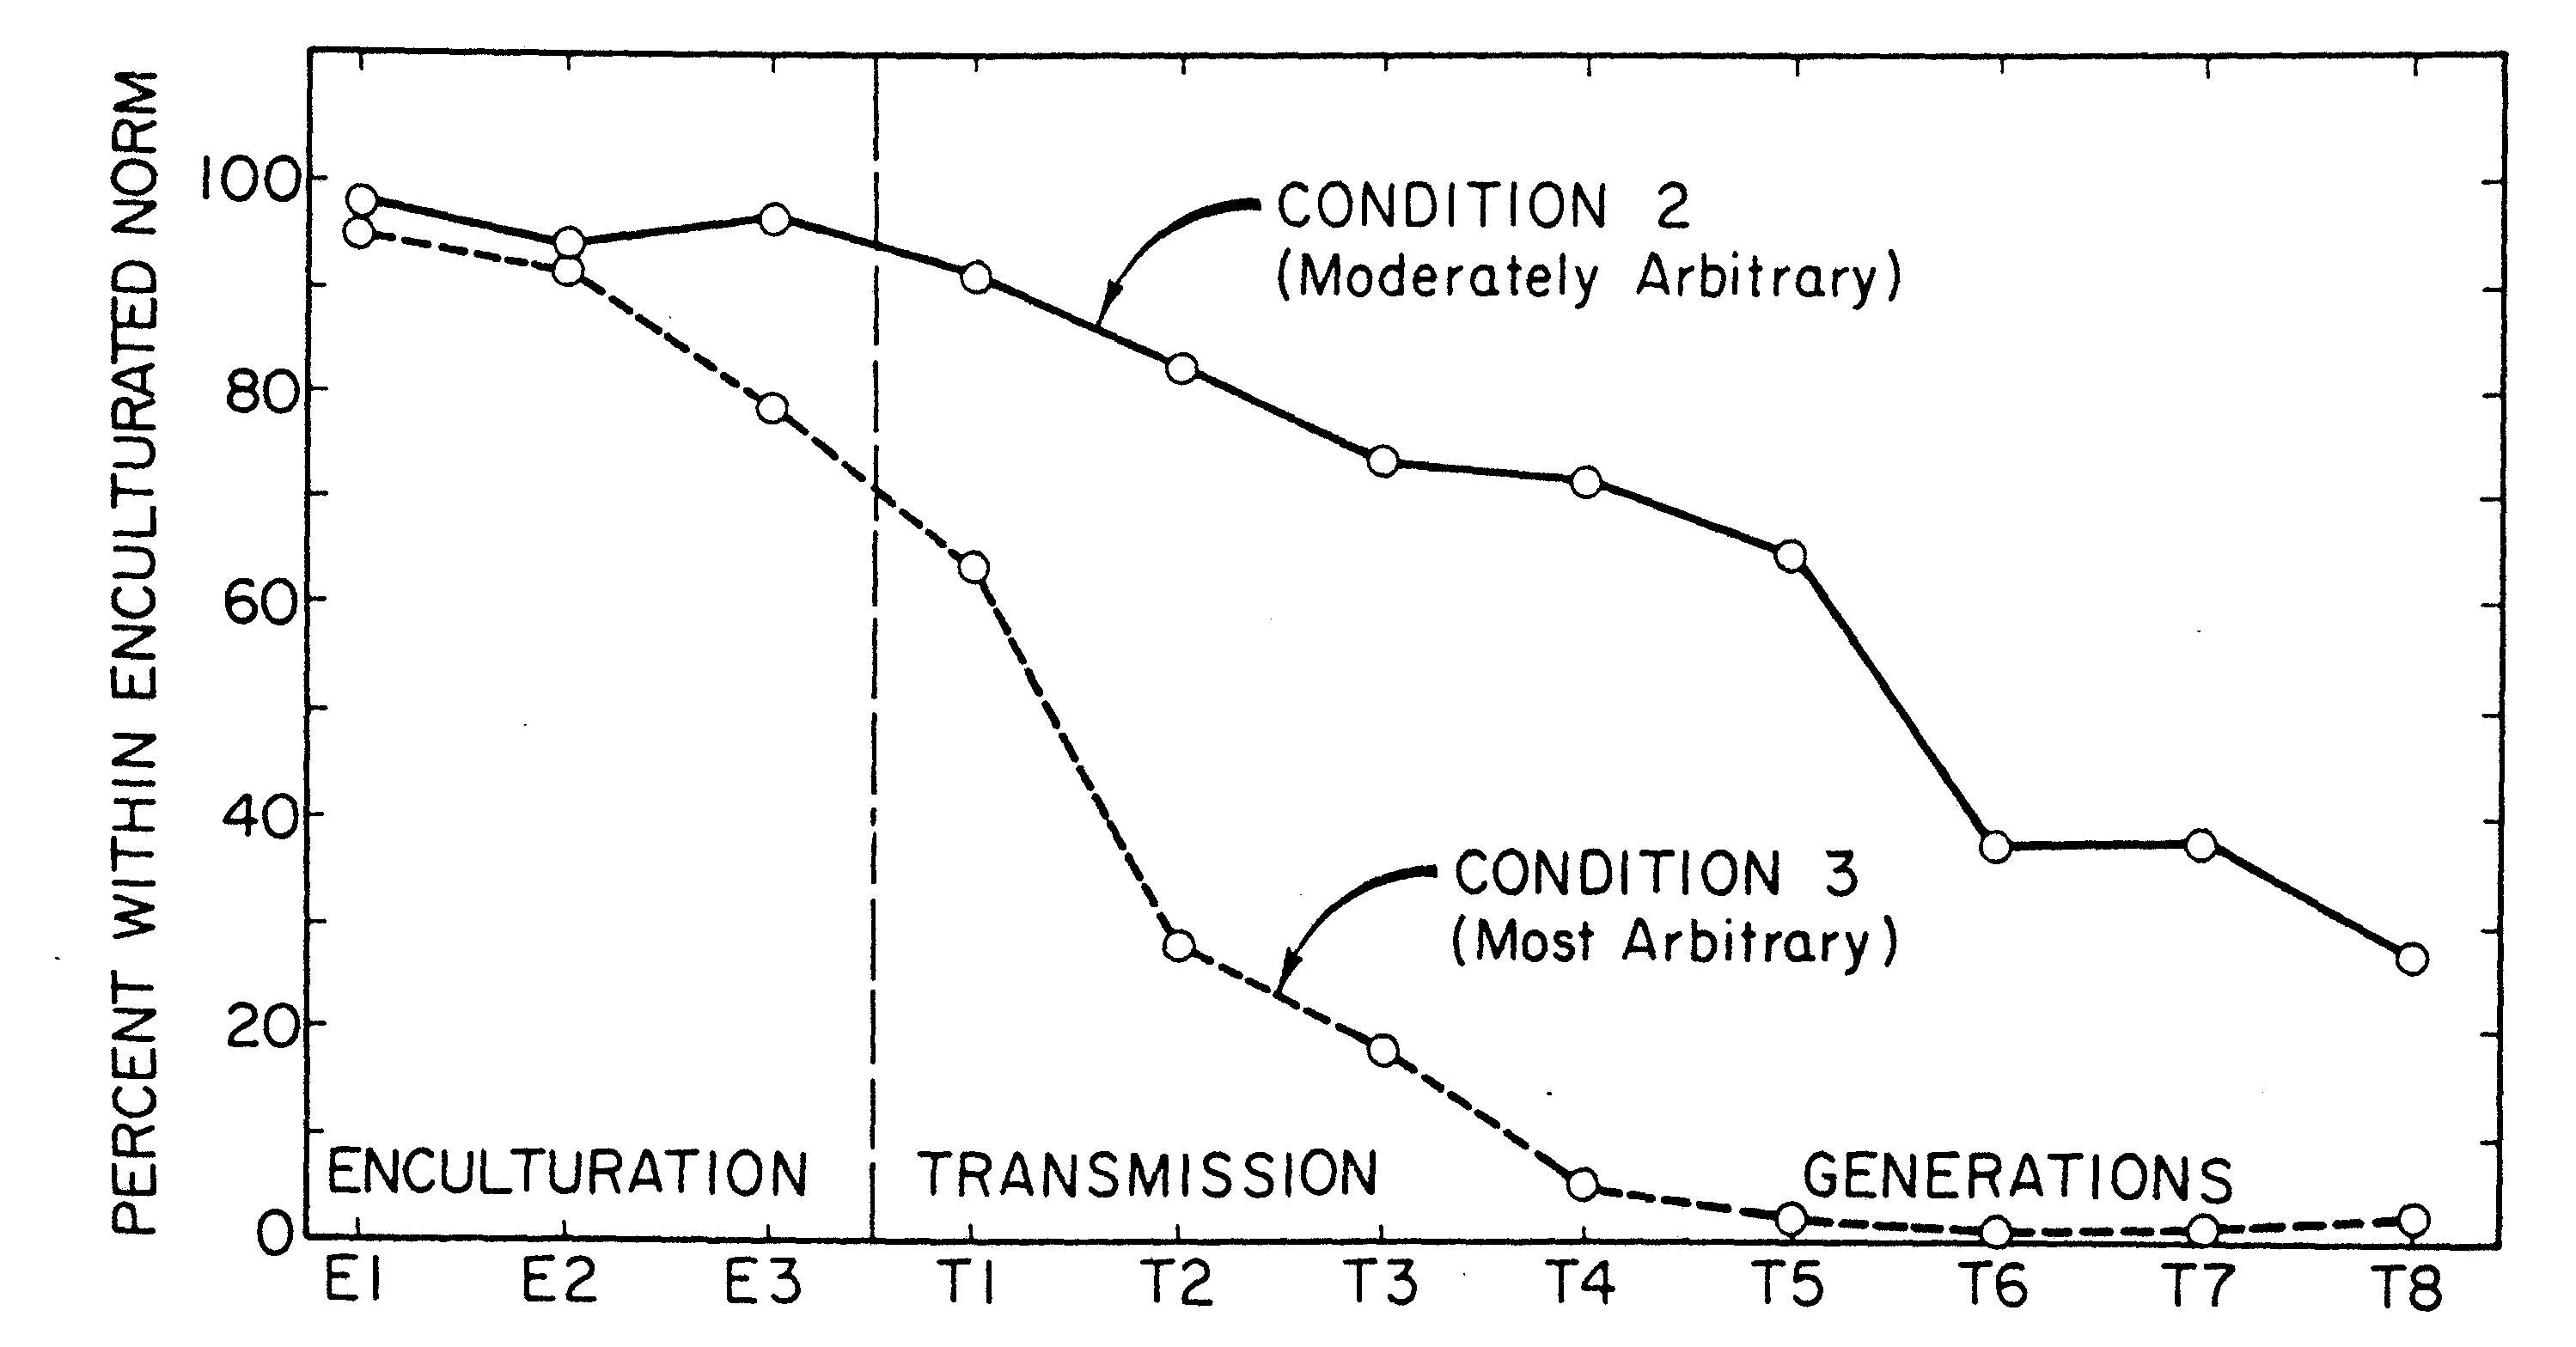 Figure 1 Conformity to enculturation norms